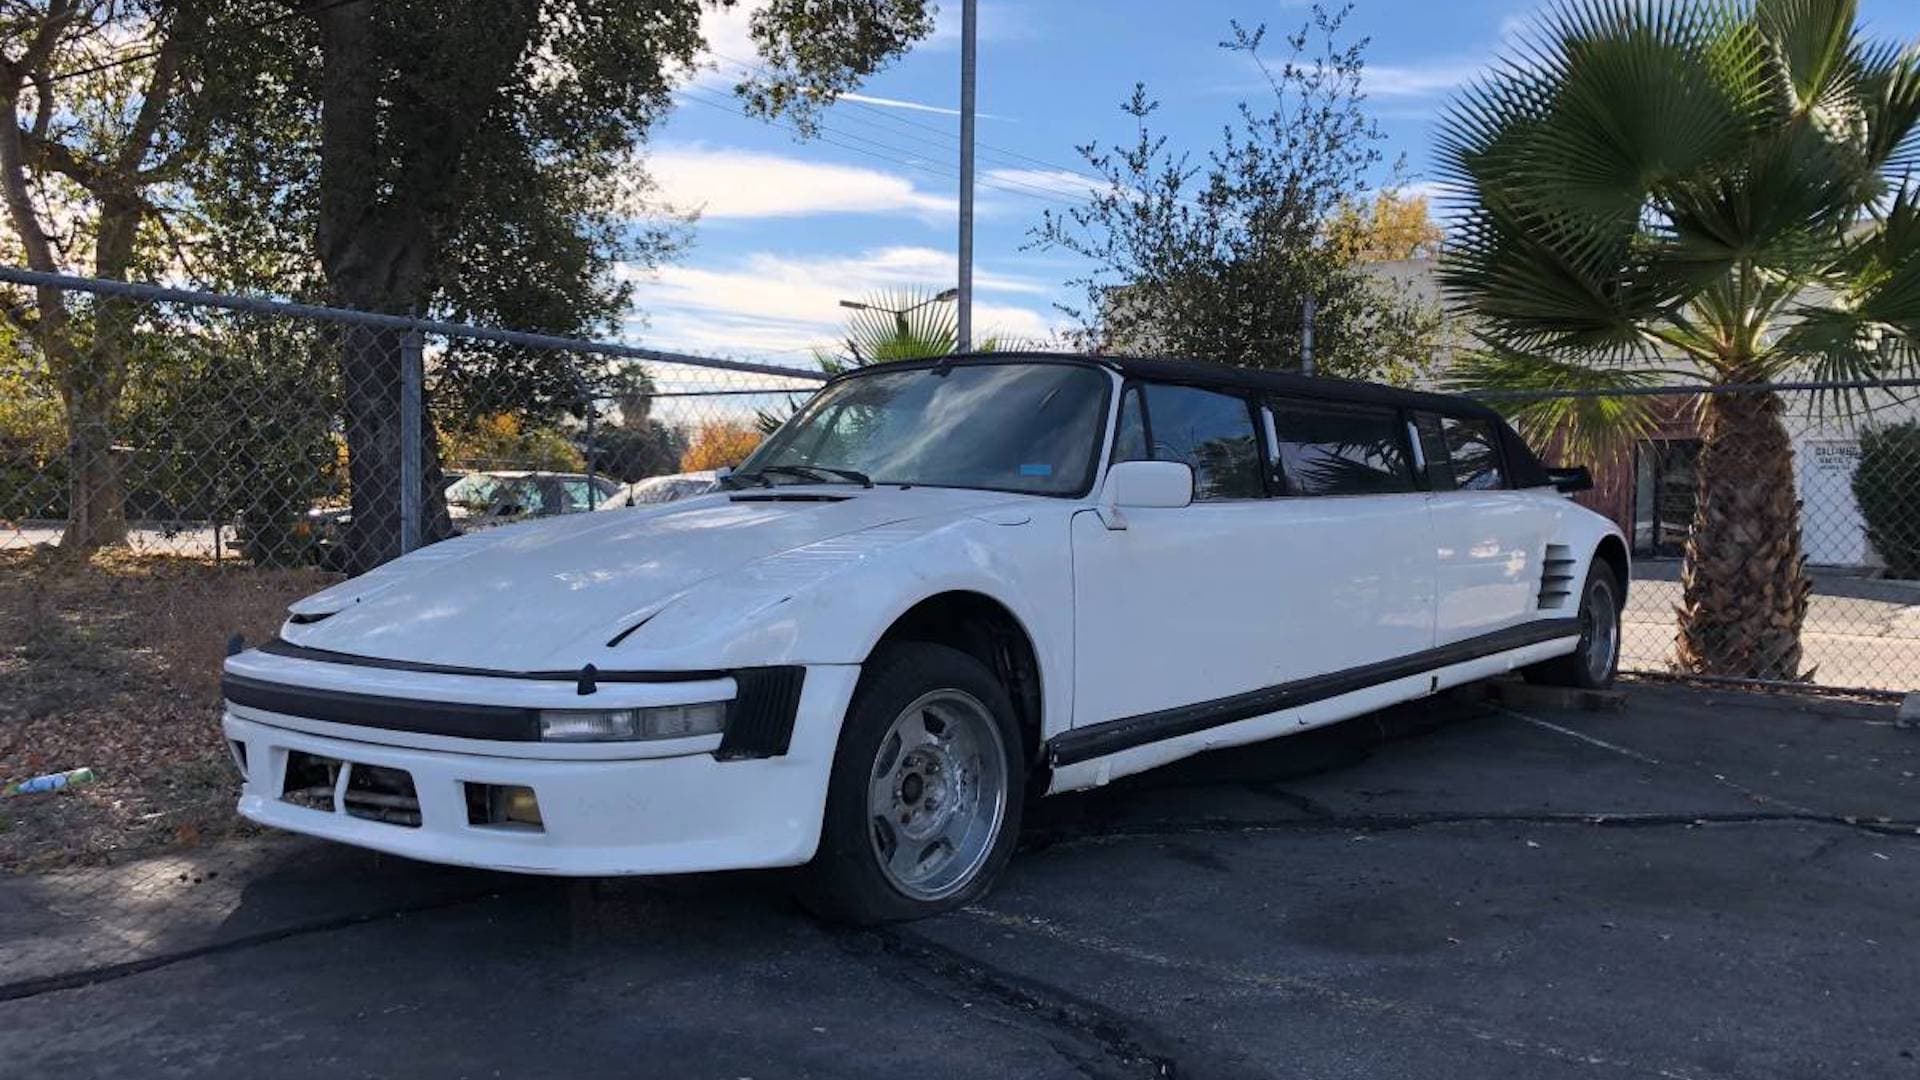 Someone Turned a Porsche 930 Convertible Into a Limo and Now They’re Selling It